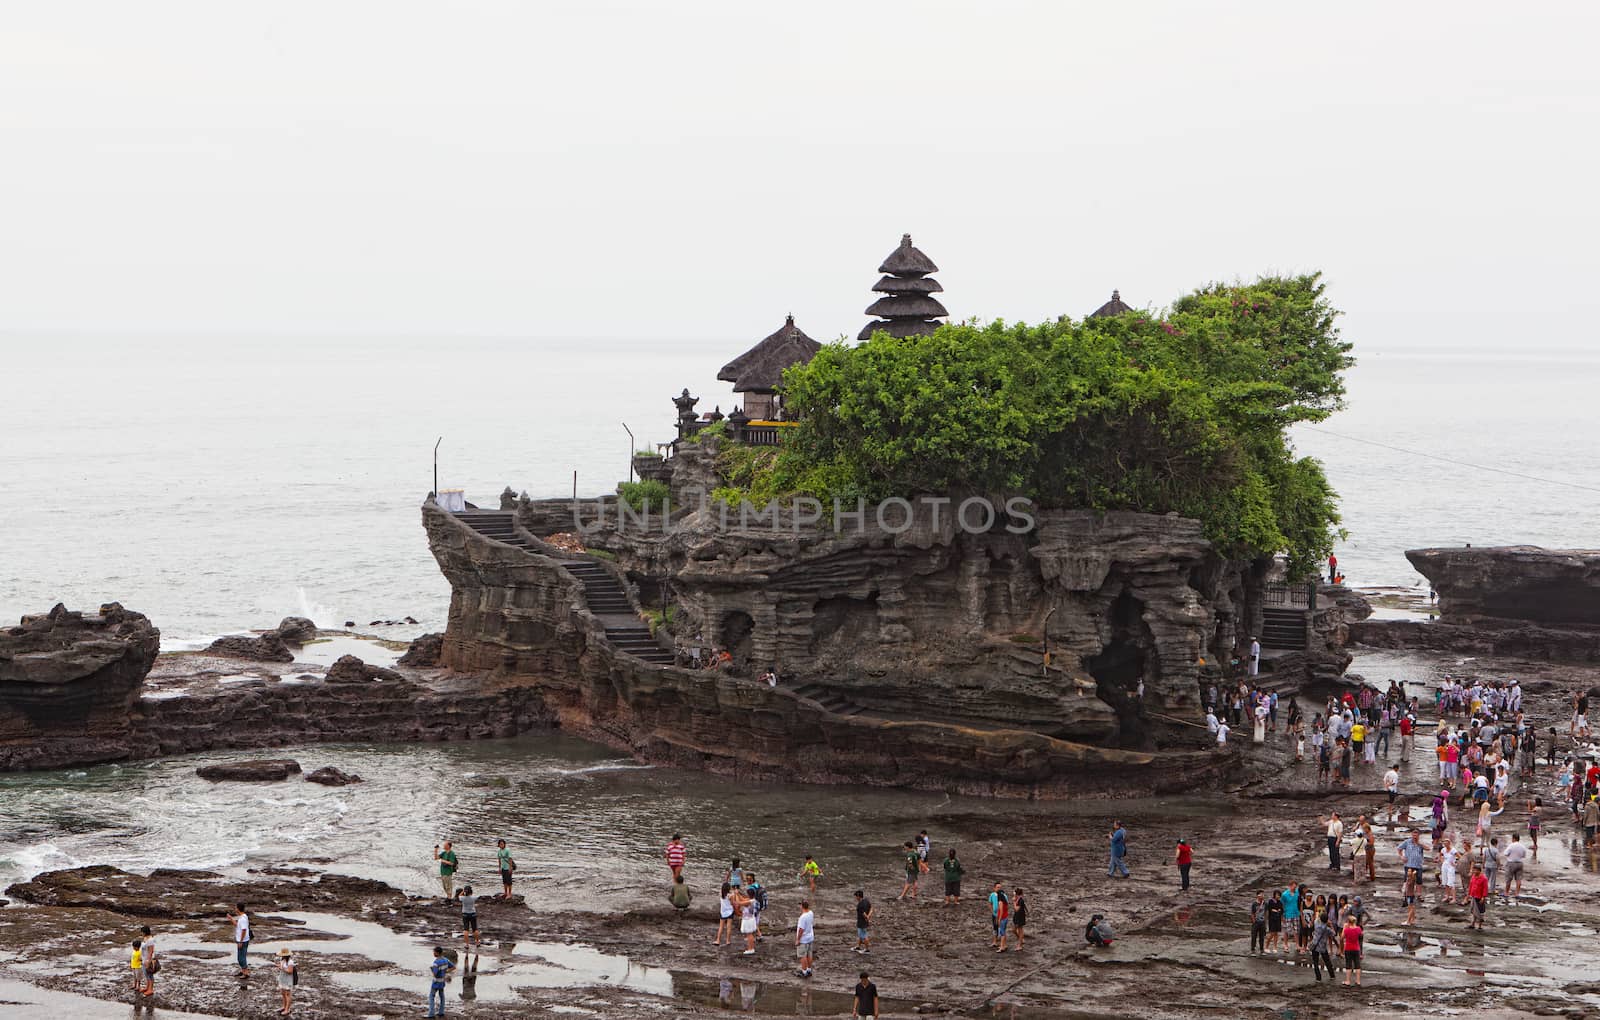 Tourists on an ocean coast near the temple Tana Lot, Bali, Indonesia 11.03.2012. Tanah Lot is one of the most important sea temples of Bali